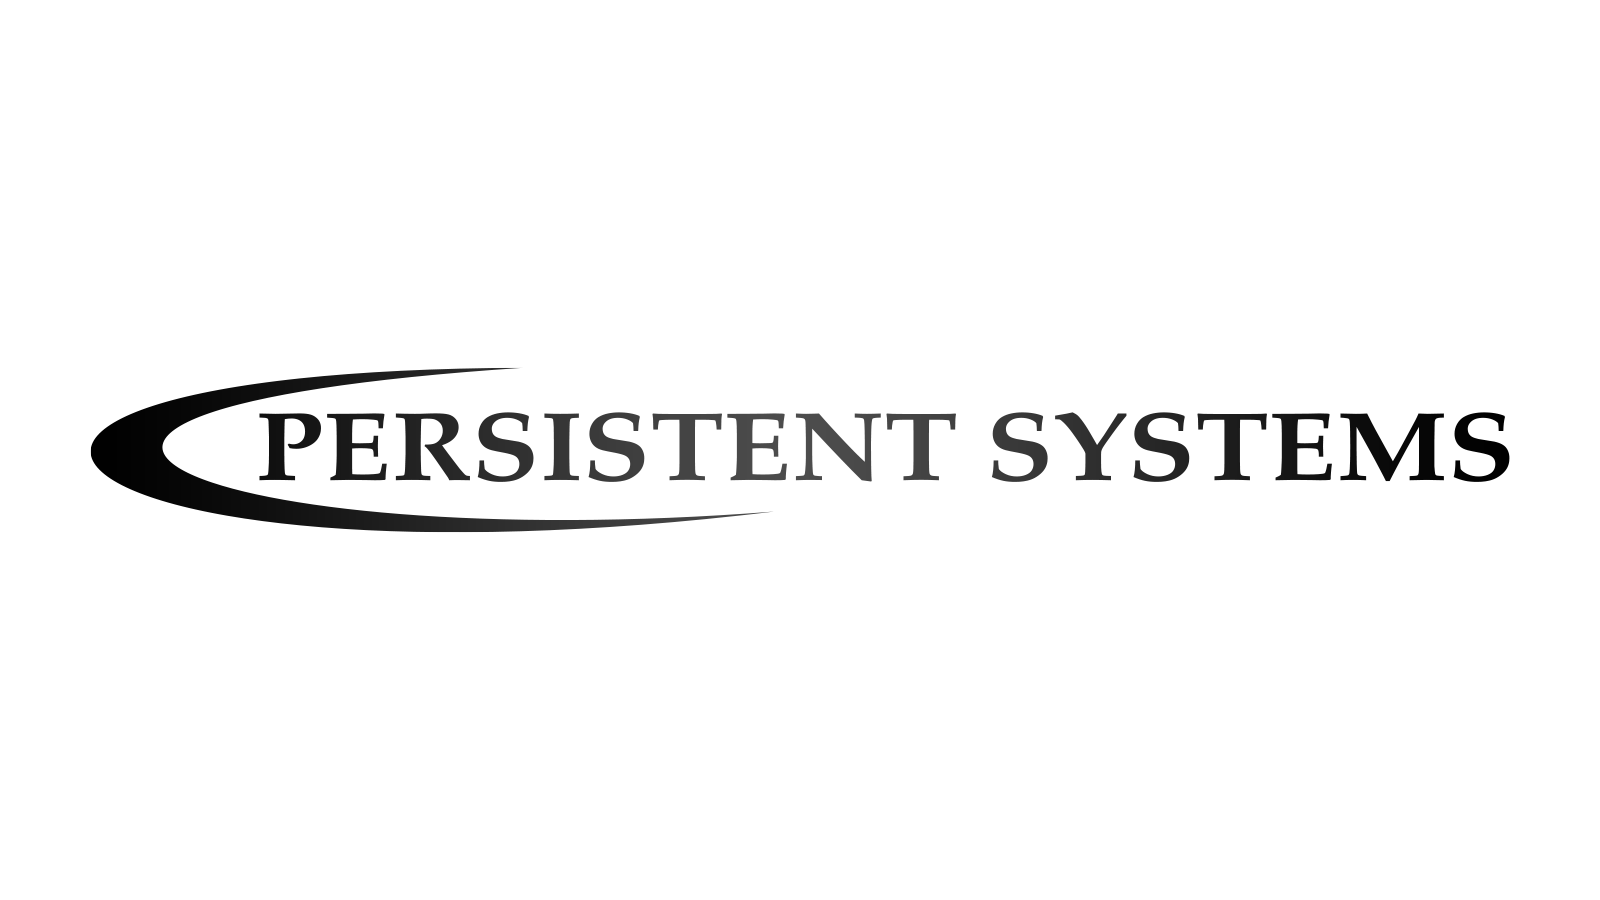 Persistent Systems on LinkedIn: #seebeyondriseabove #recognition  #talentacquisition #growth | 11 comments